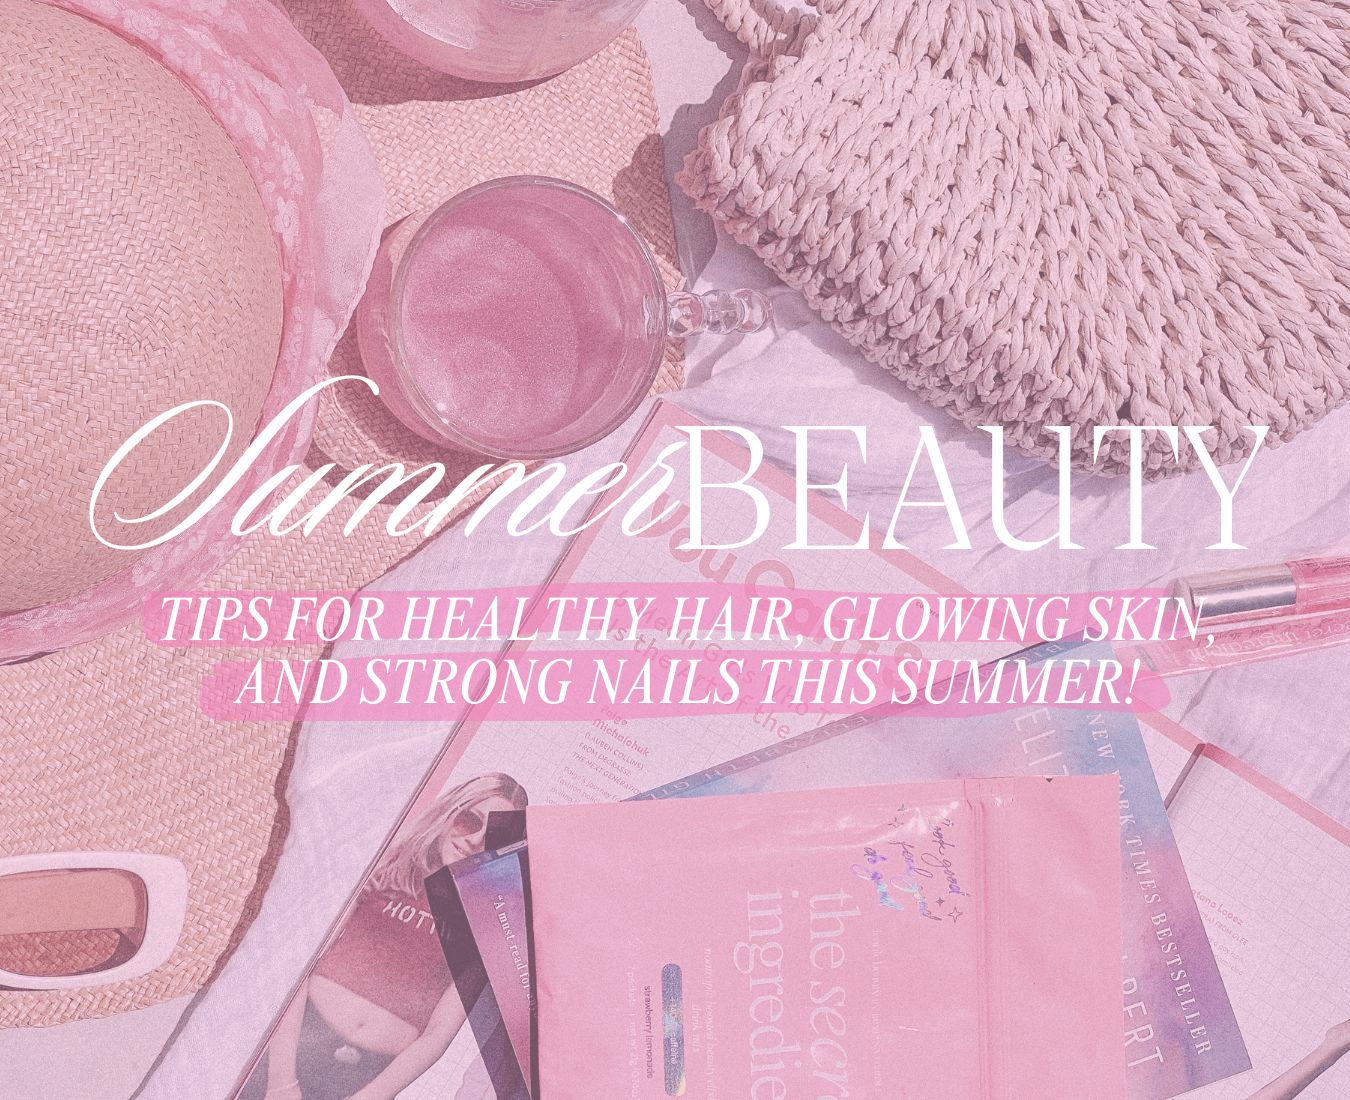 Summer Beauty: Everything You need to know for Healthy Hair, Glowing Skin, and Strong Nails this summer!